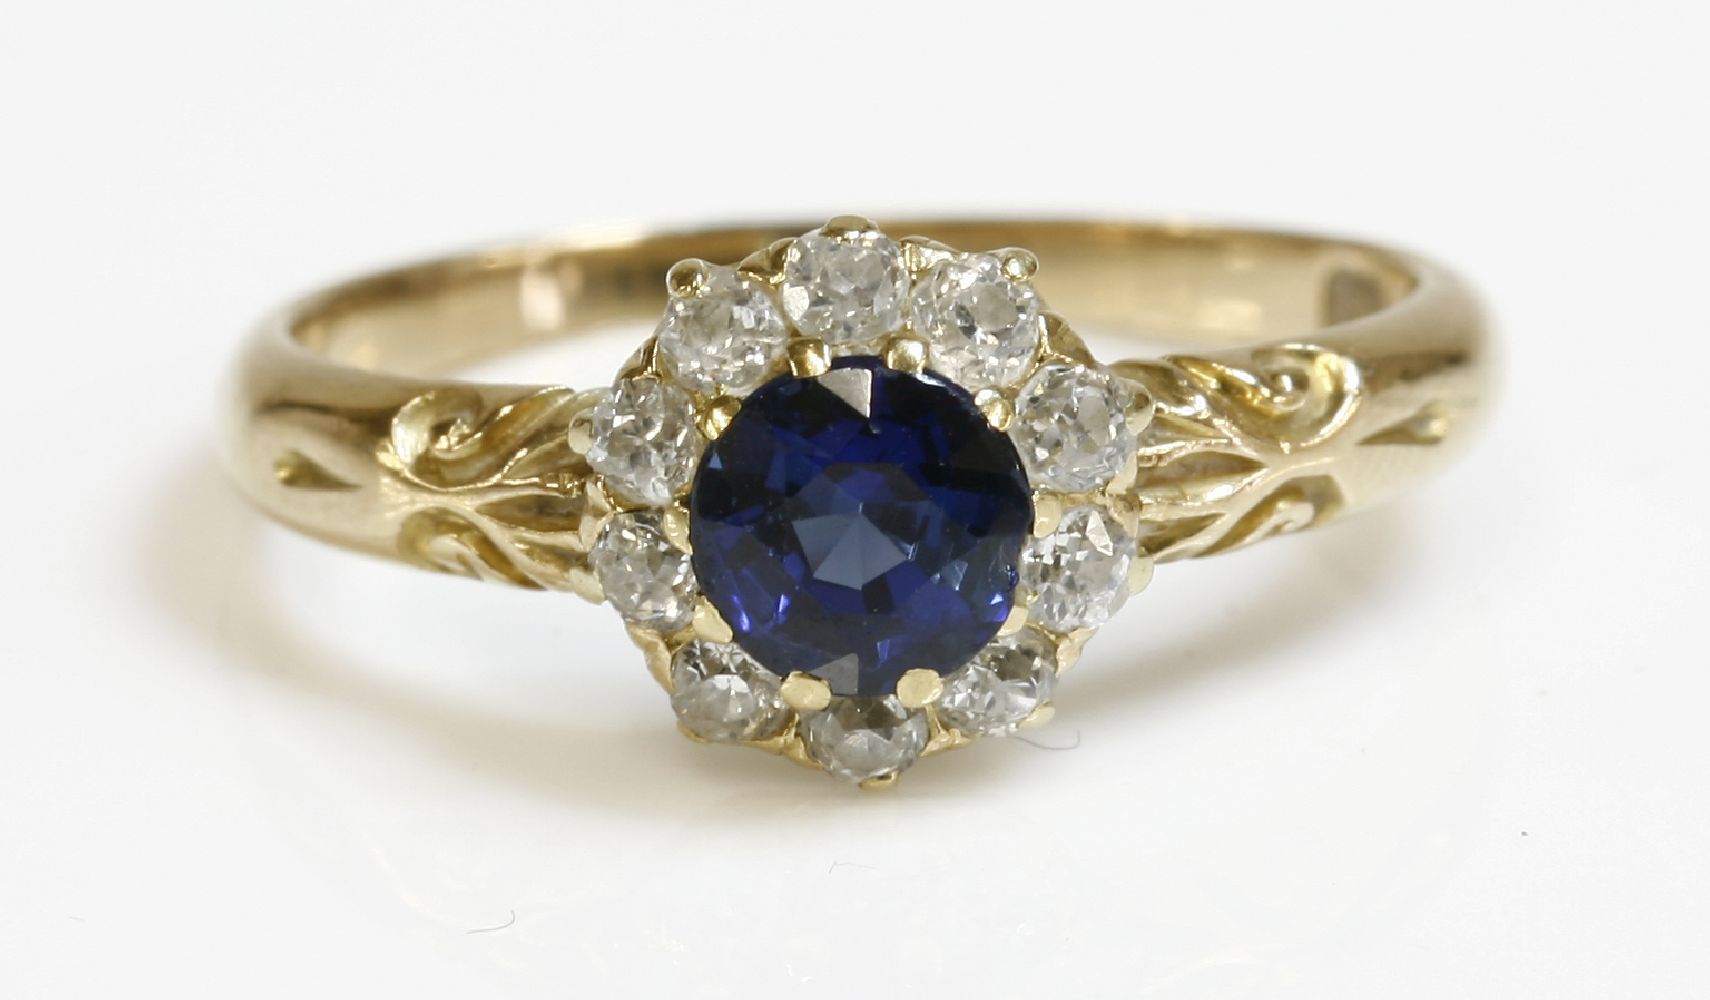 An Edwardian sapphire and diamond circular cluster ring,with a circular mixed cut sapphire, claw set